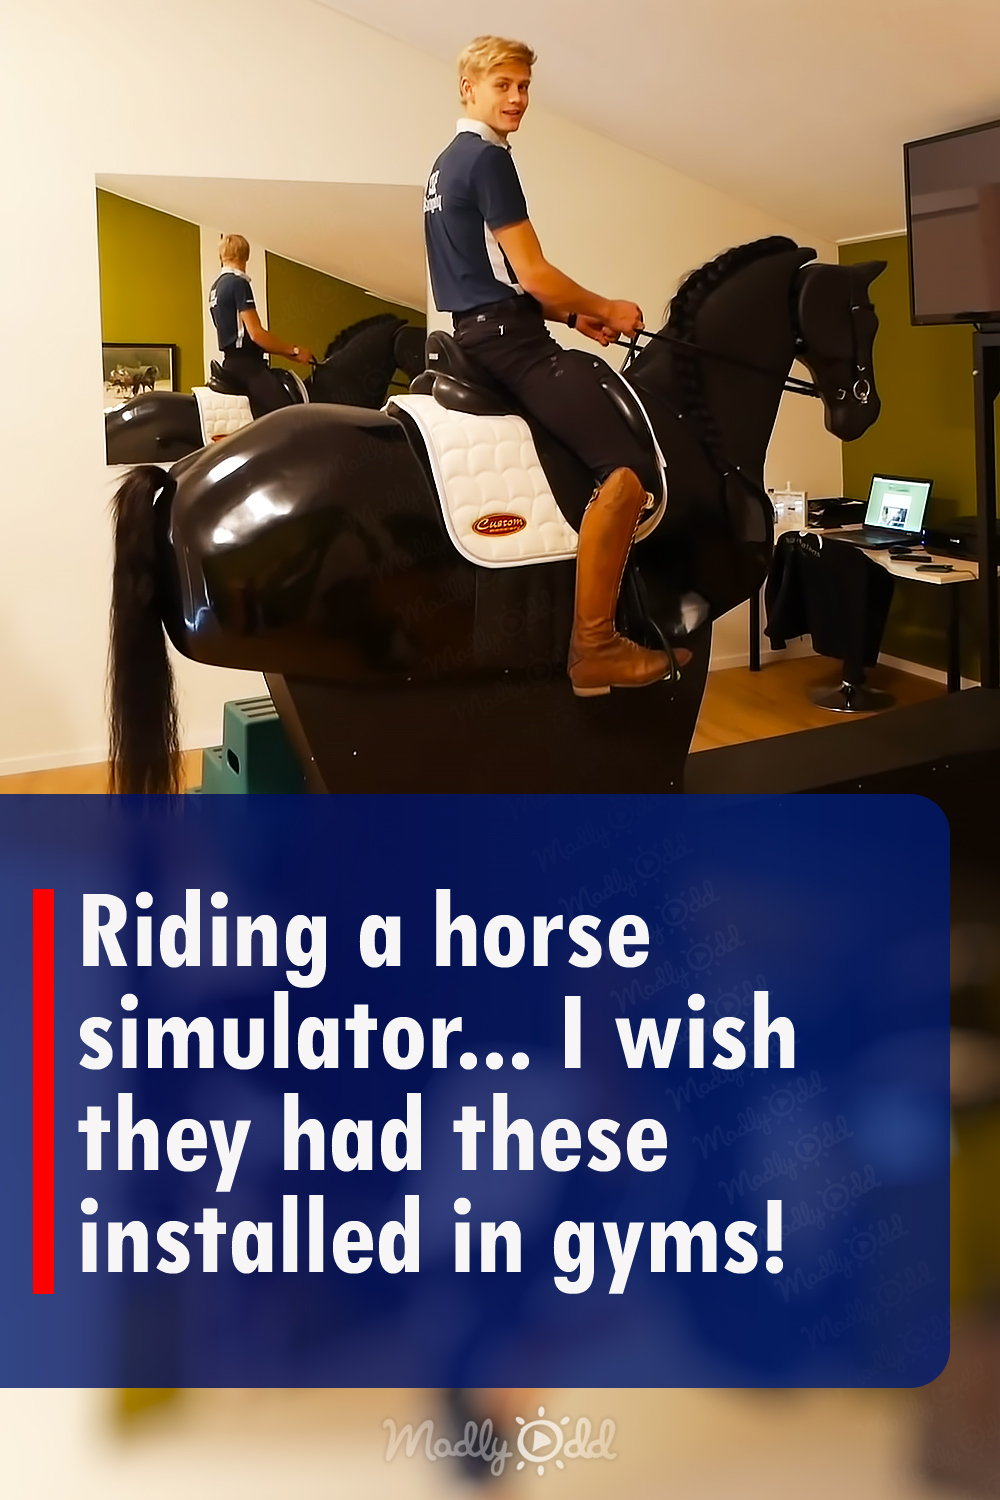 Riding a horse simulator... I wish they had these installed in gyms!